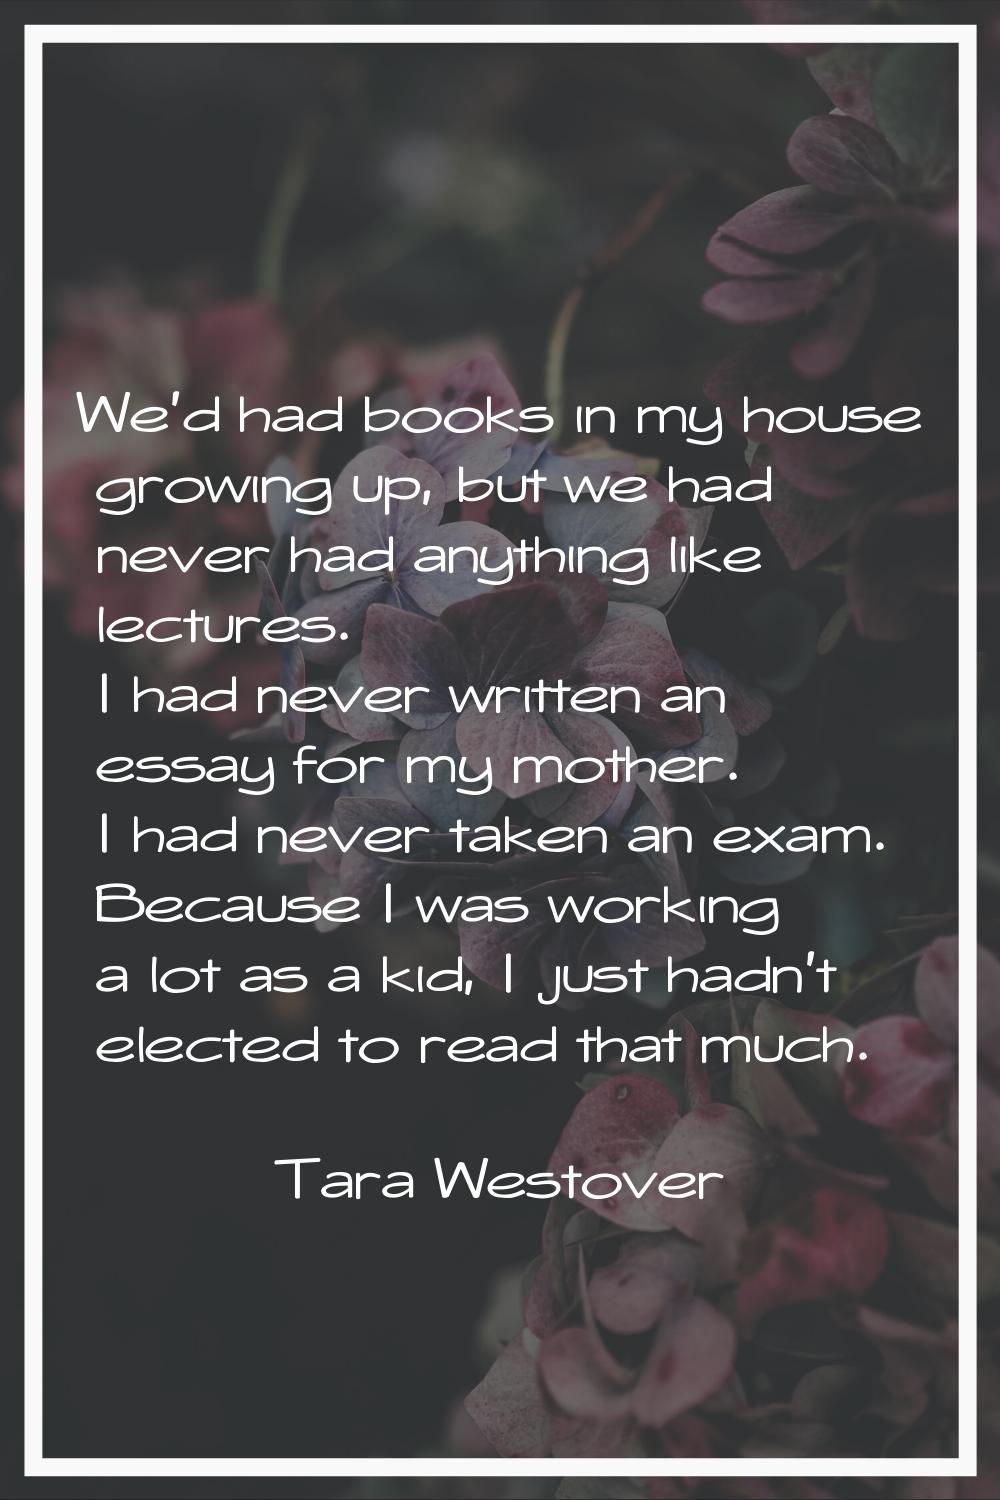 We'd had books in my house growing up, but we had never had anything like lectures. I had never wri